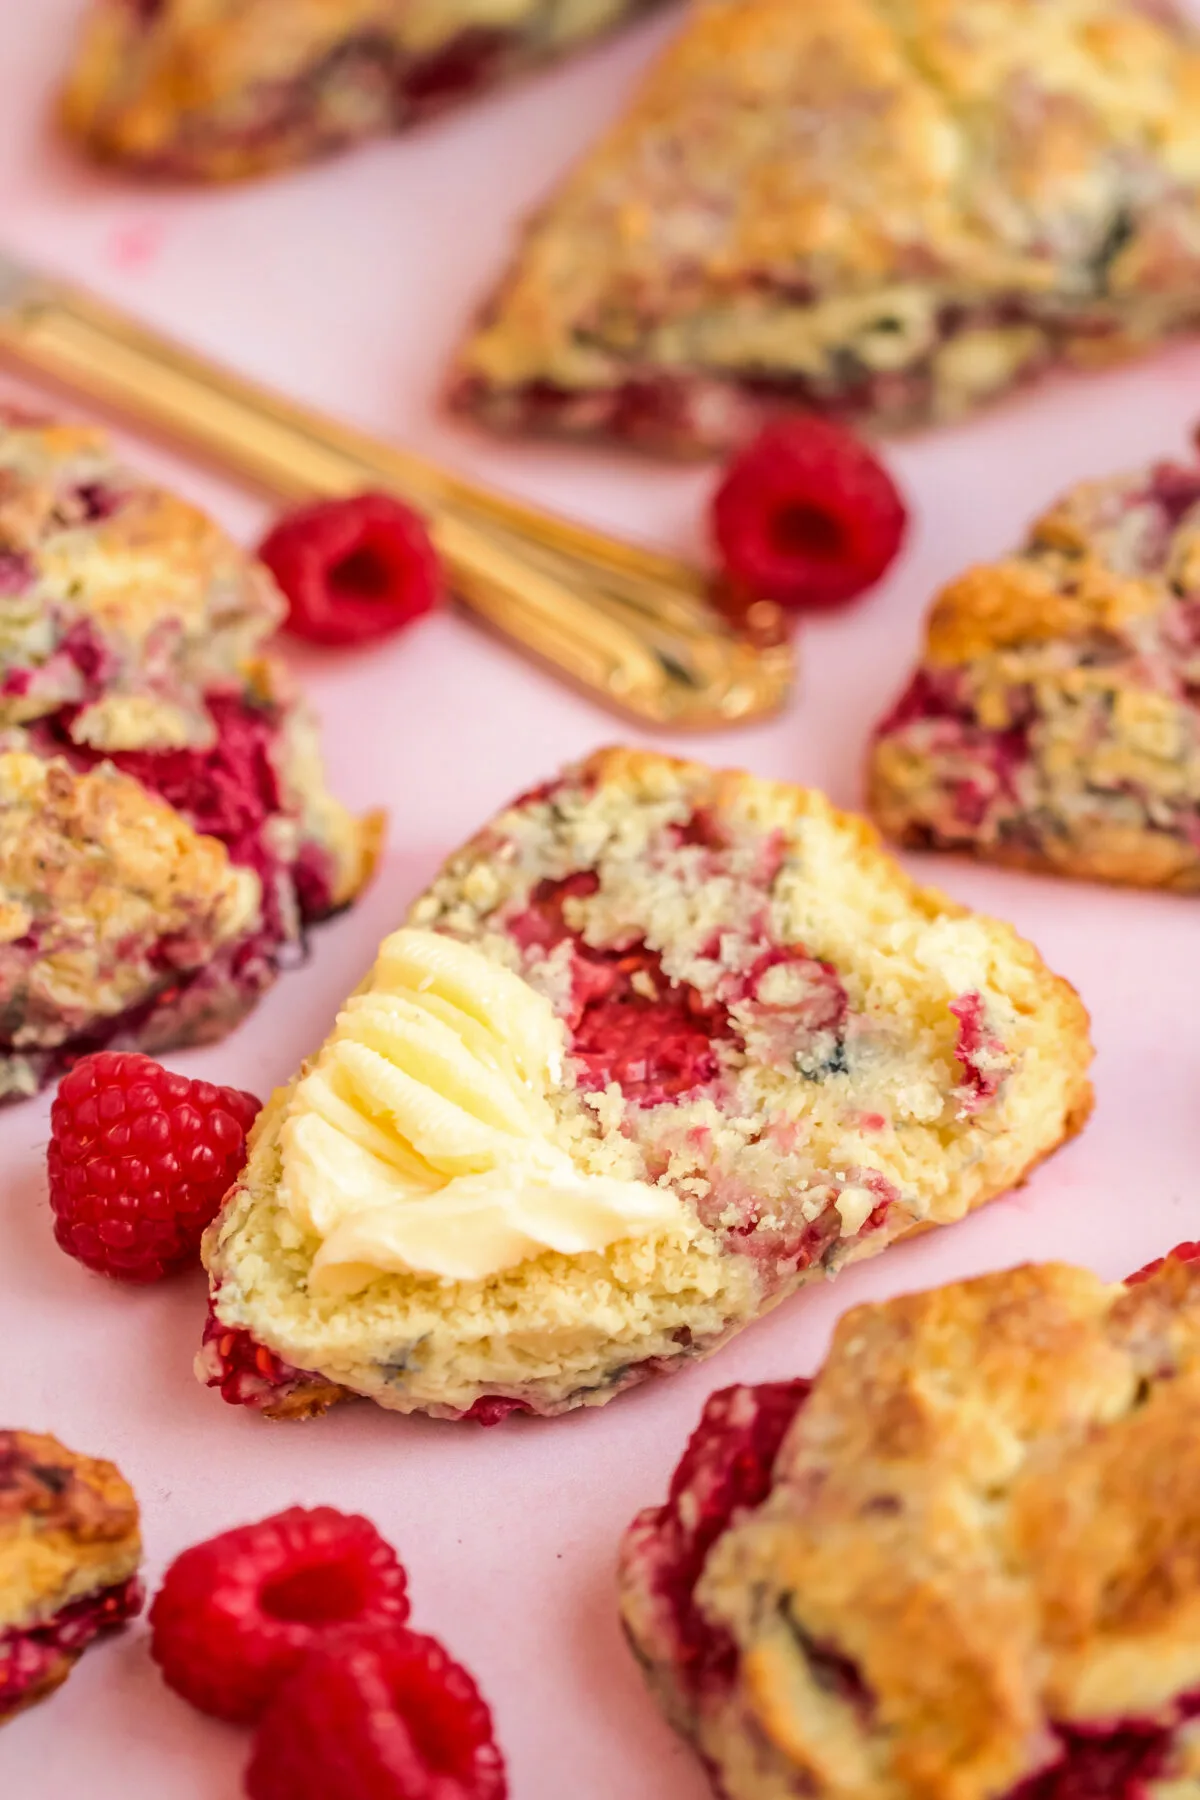 This scrumptious recipe for raspberry scones results in homemade scones that are light and fluffy with a crisp crust and tart raspberries!